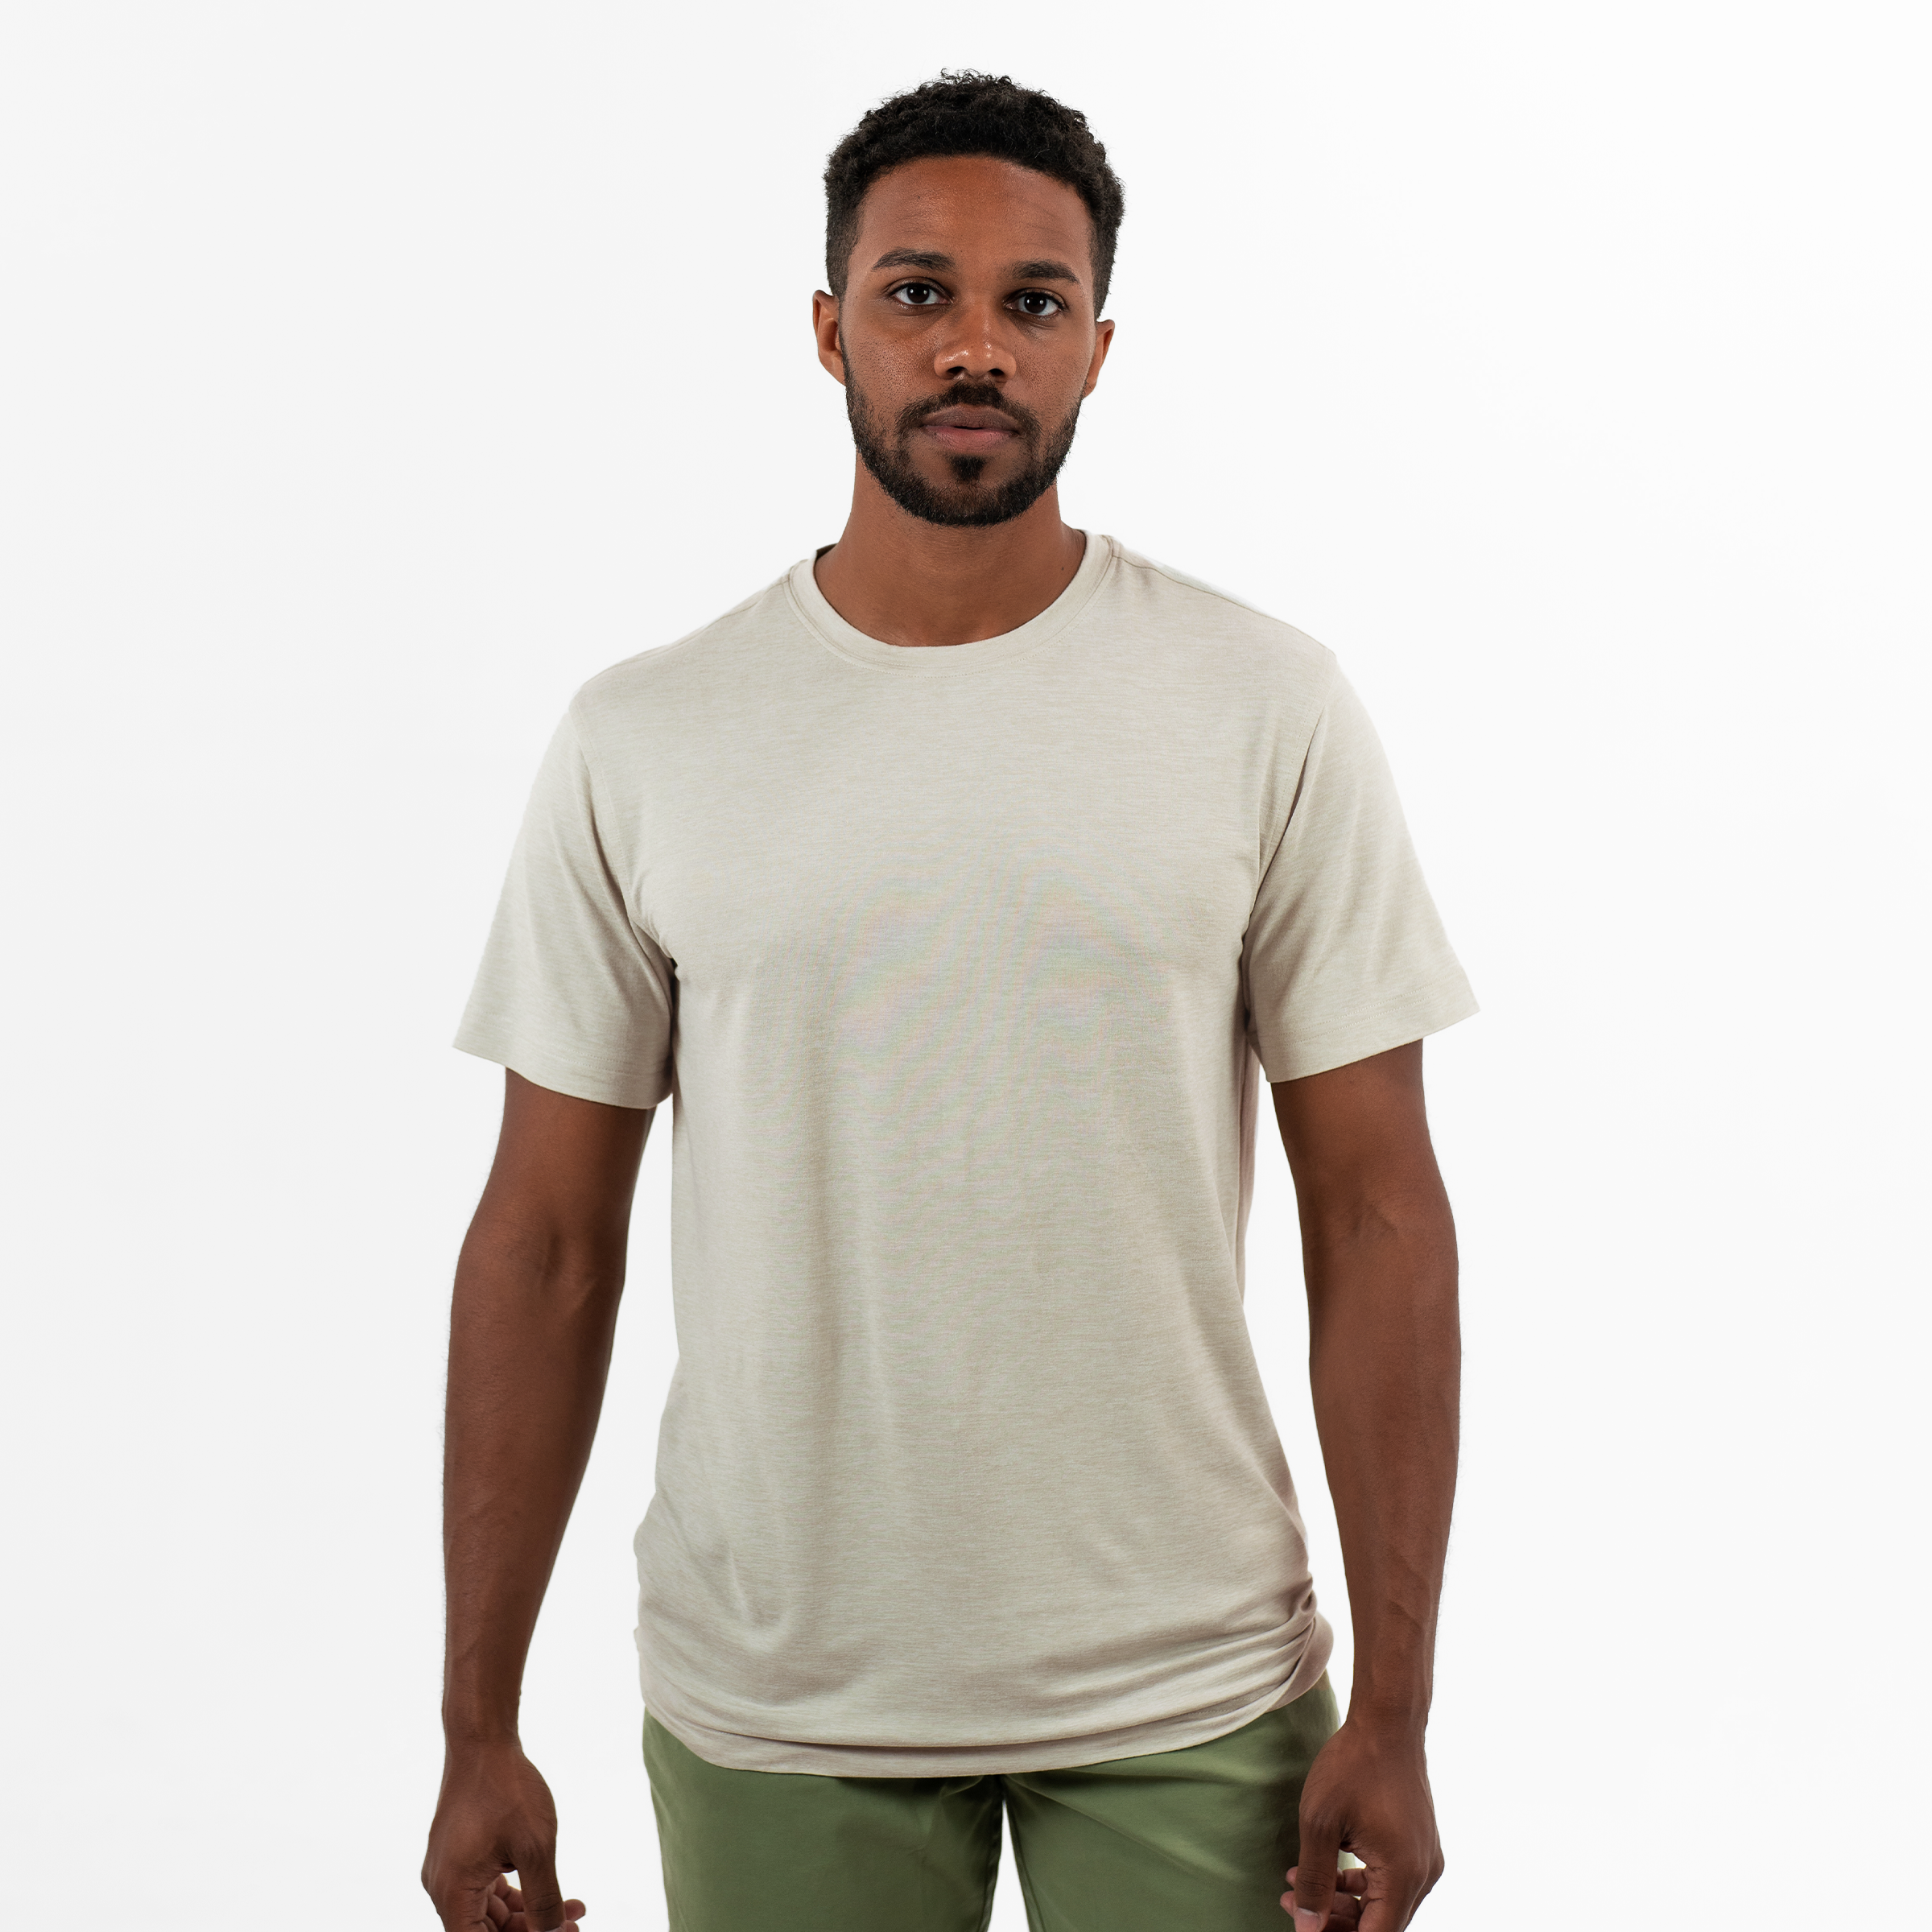 Short Sleeve Tech Tee in Stone front on model with a crew neck and heathered color